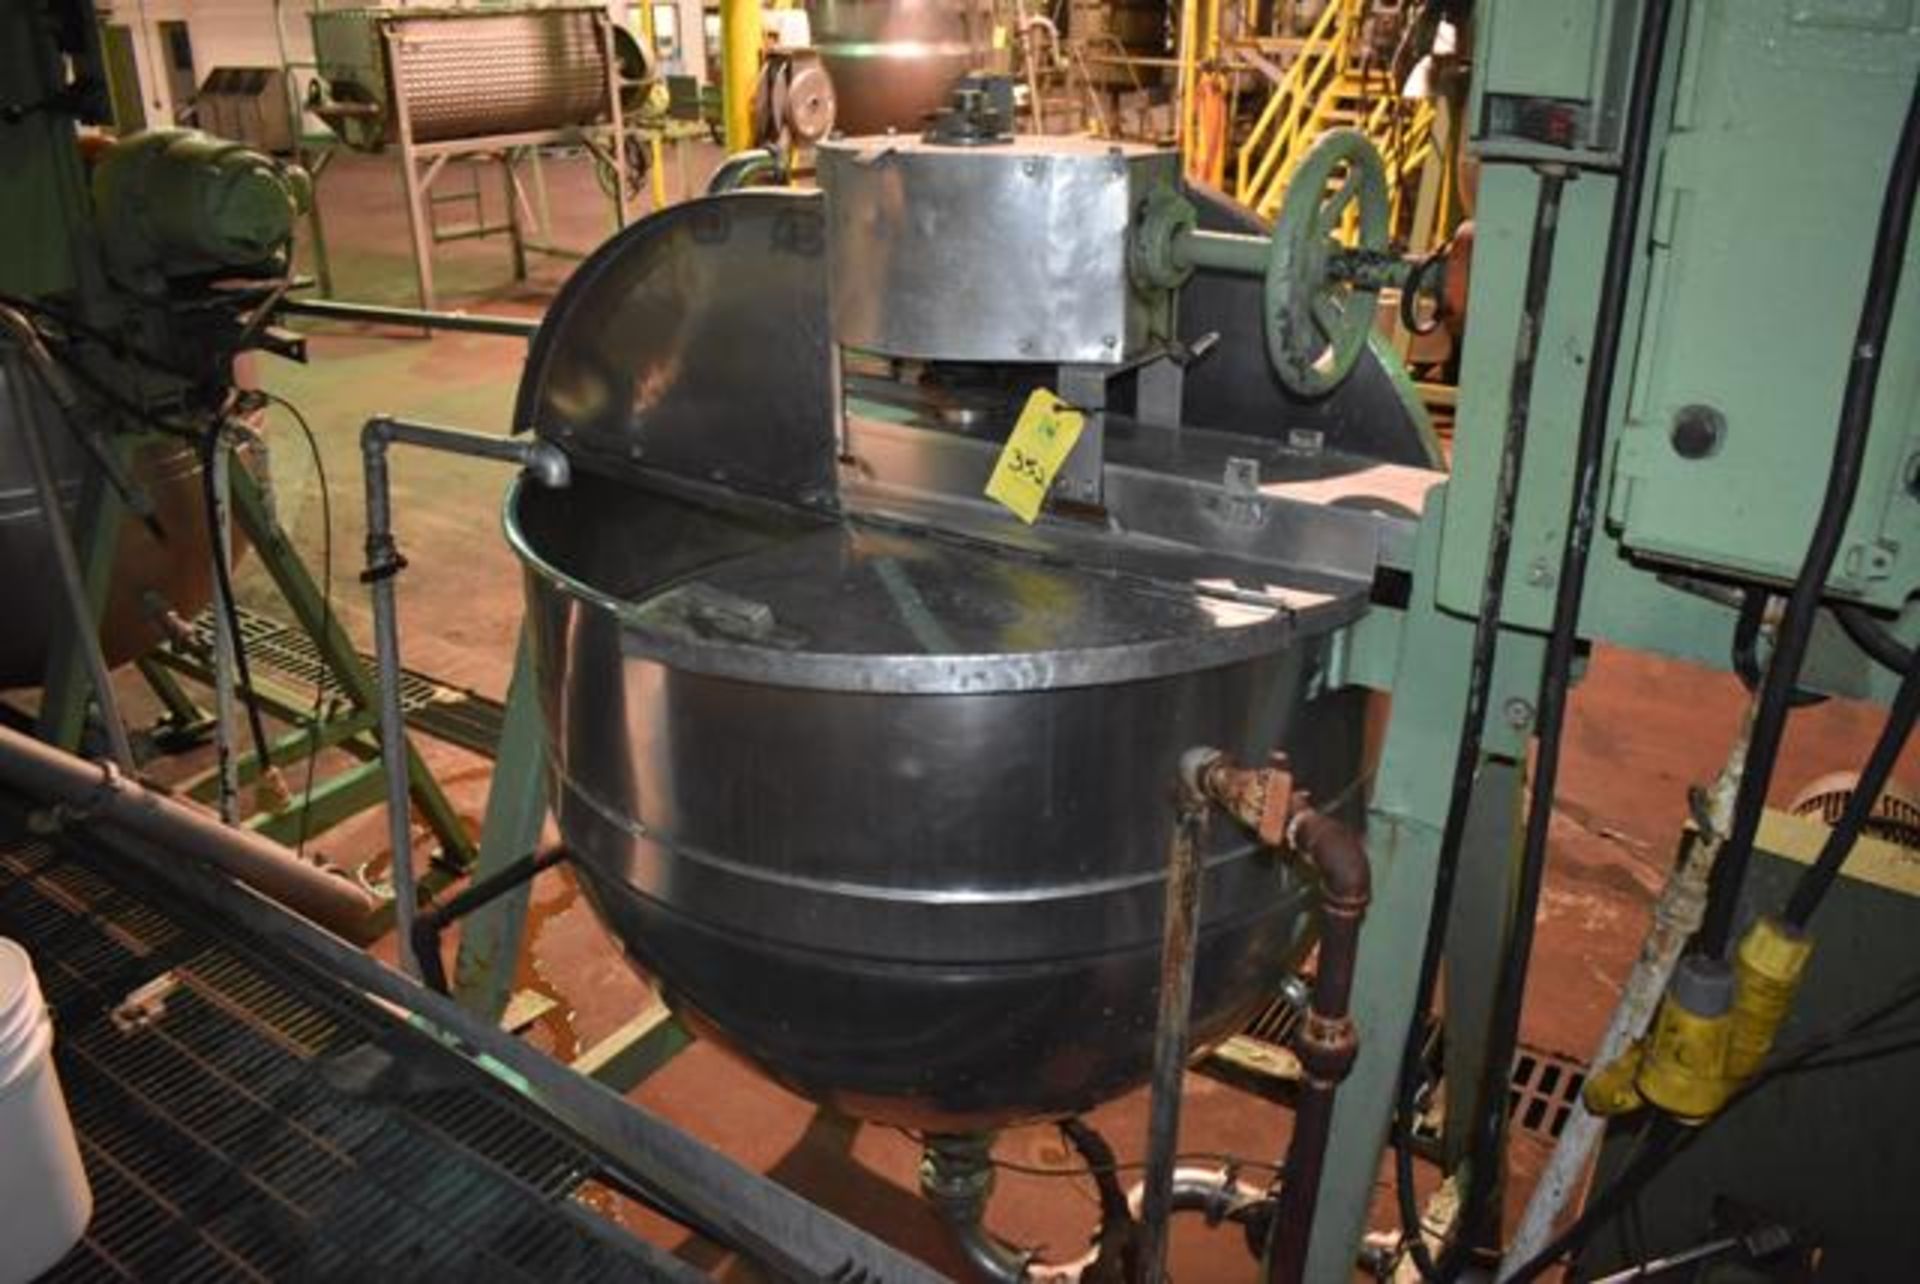 Lee Industries SS Jacketed Kettle, Rated 300 Gallon Capacity, Includes Mixer